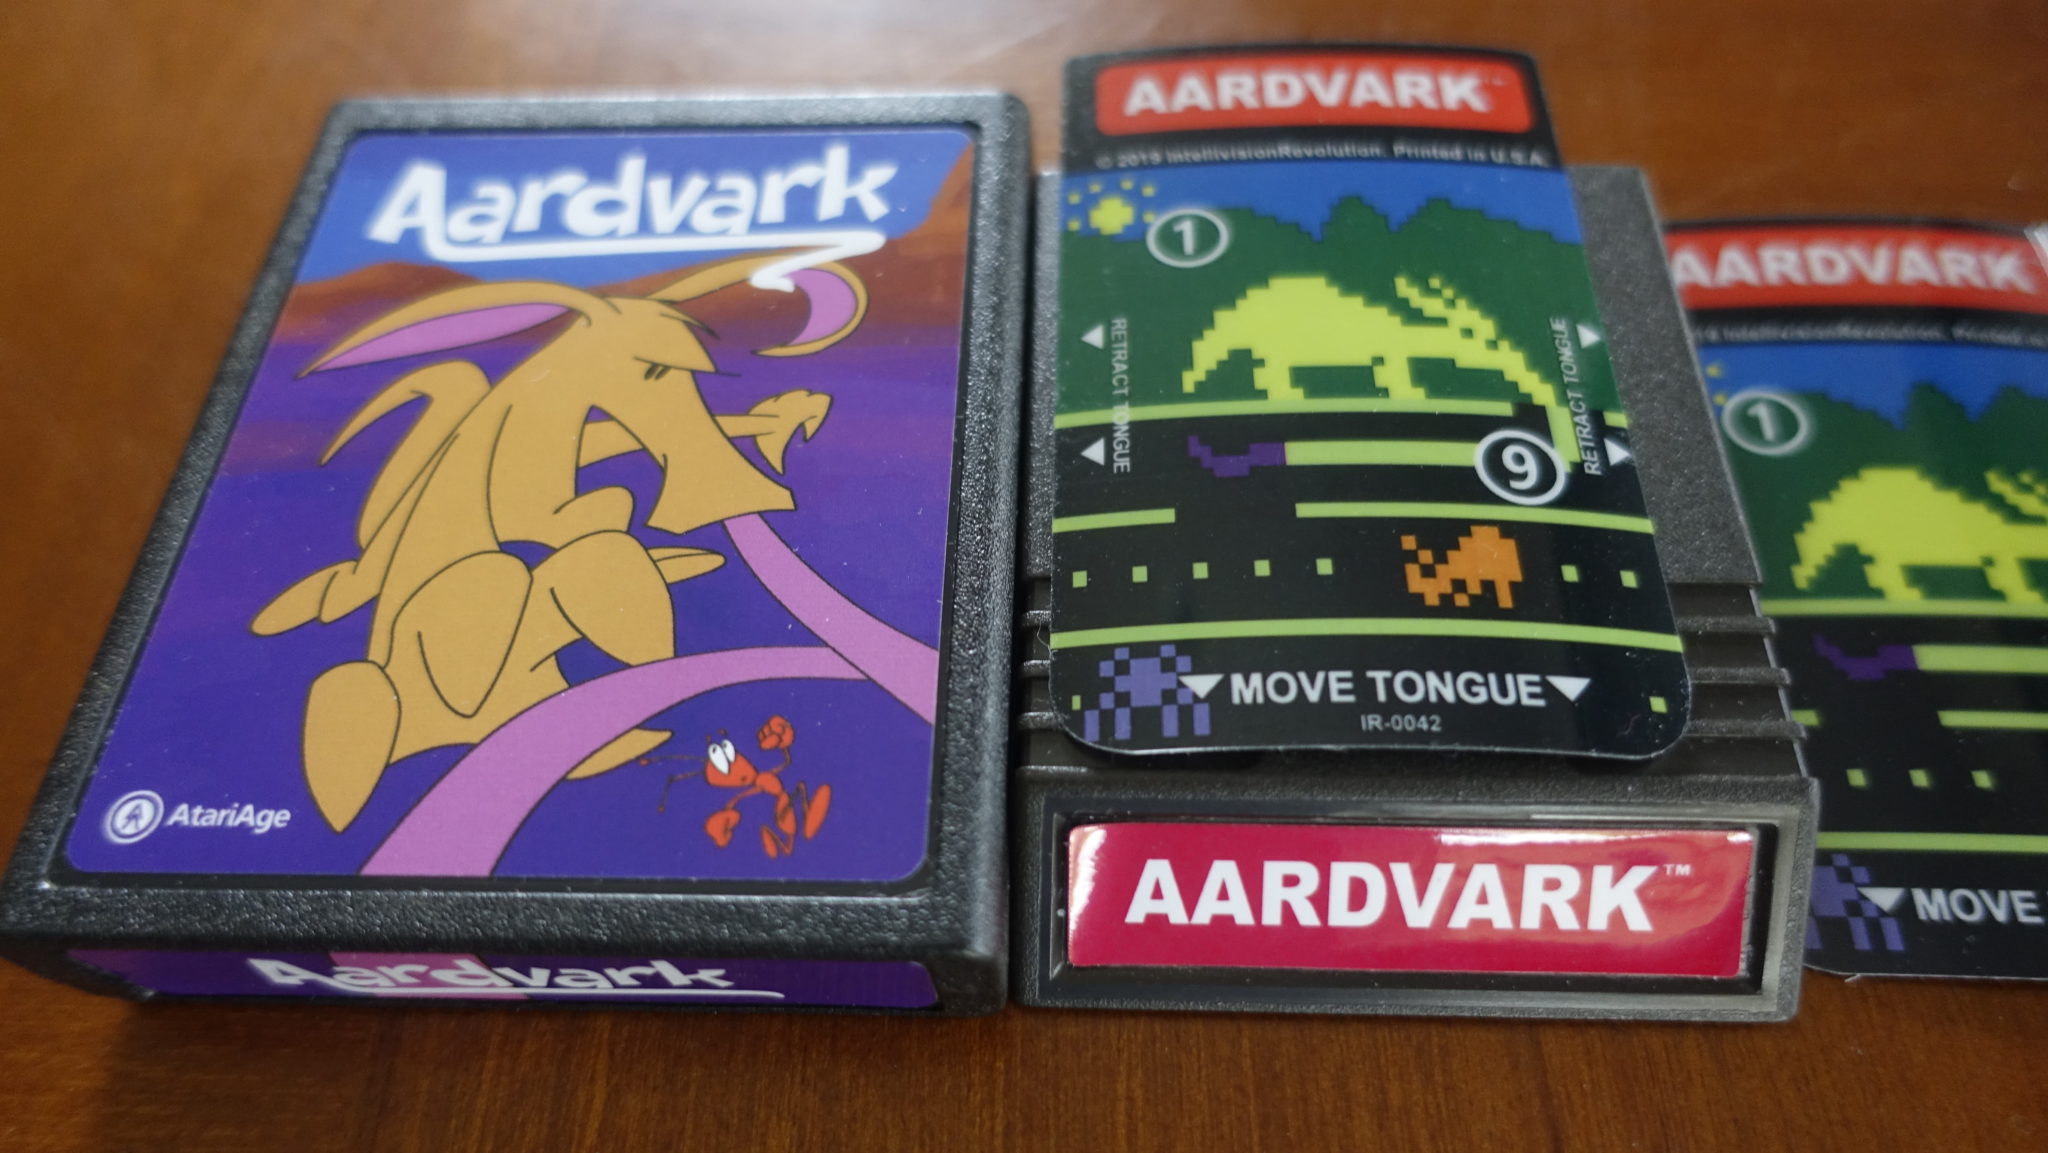 Aardvark Review for Atari2600 and Intellivision Gaming Consoles